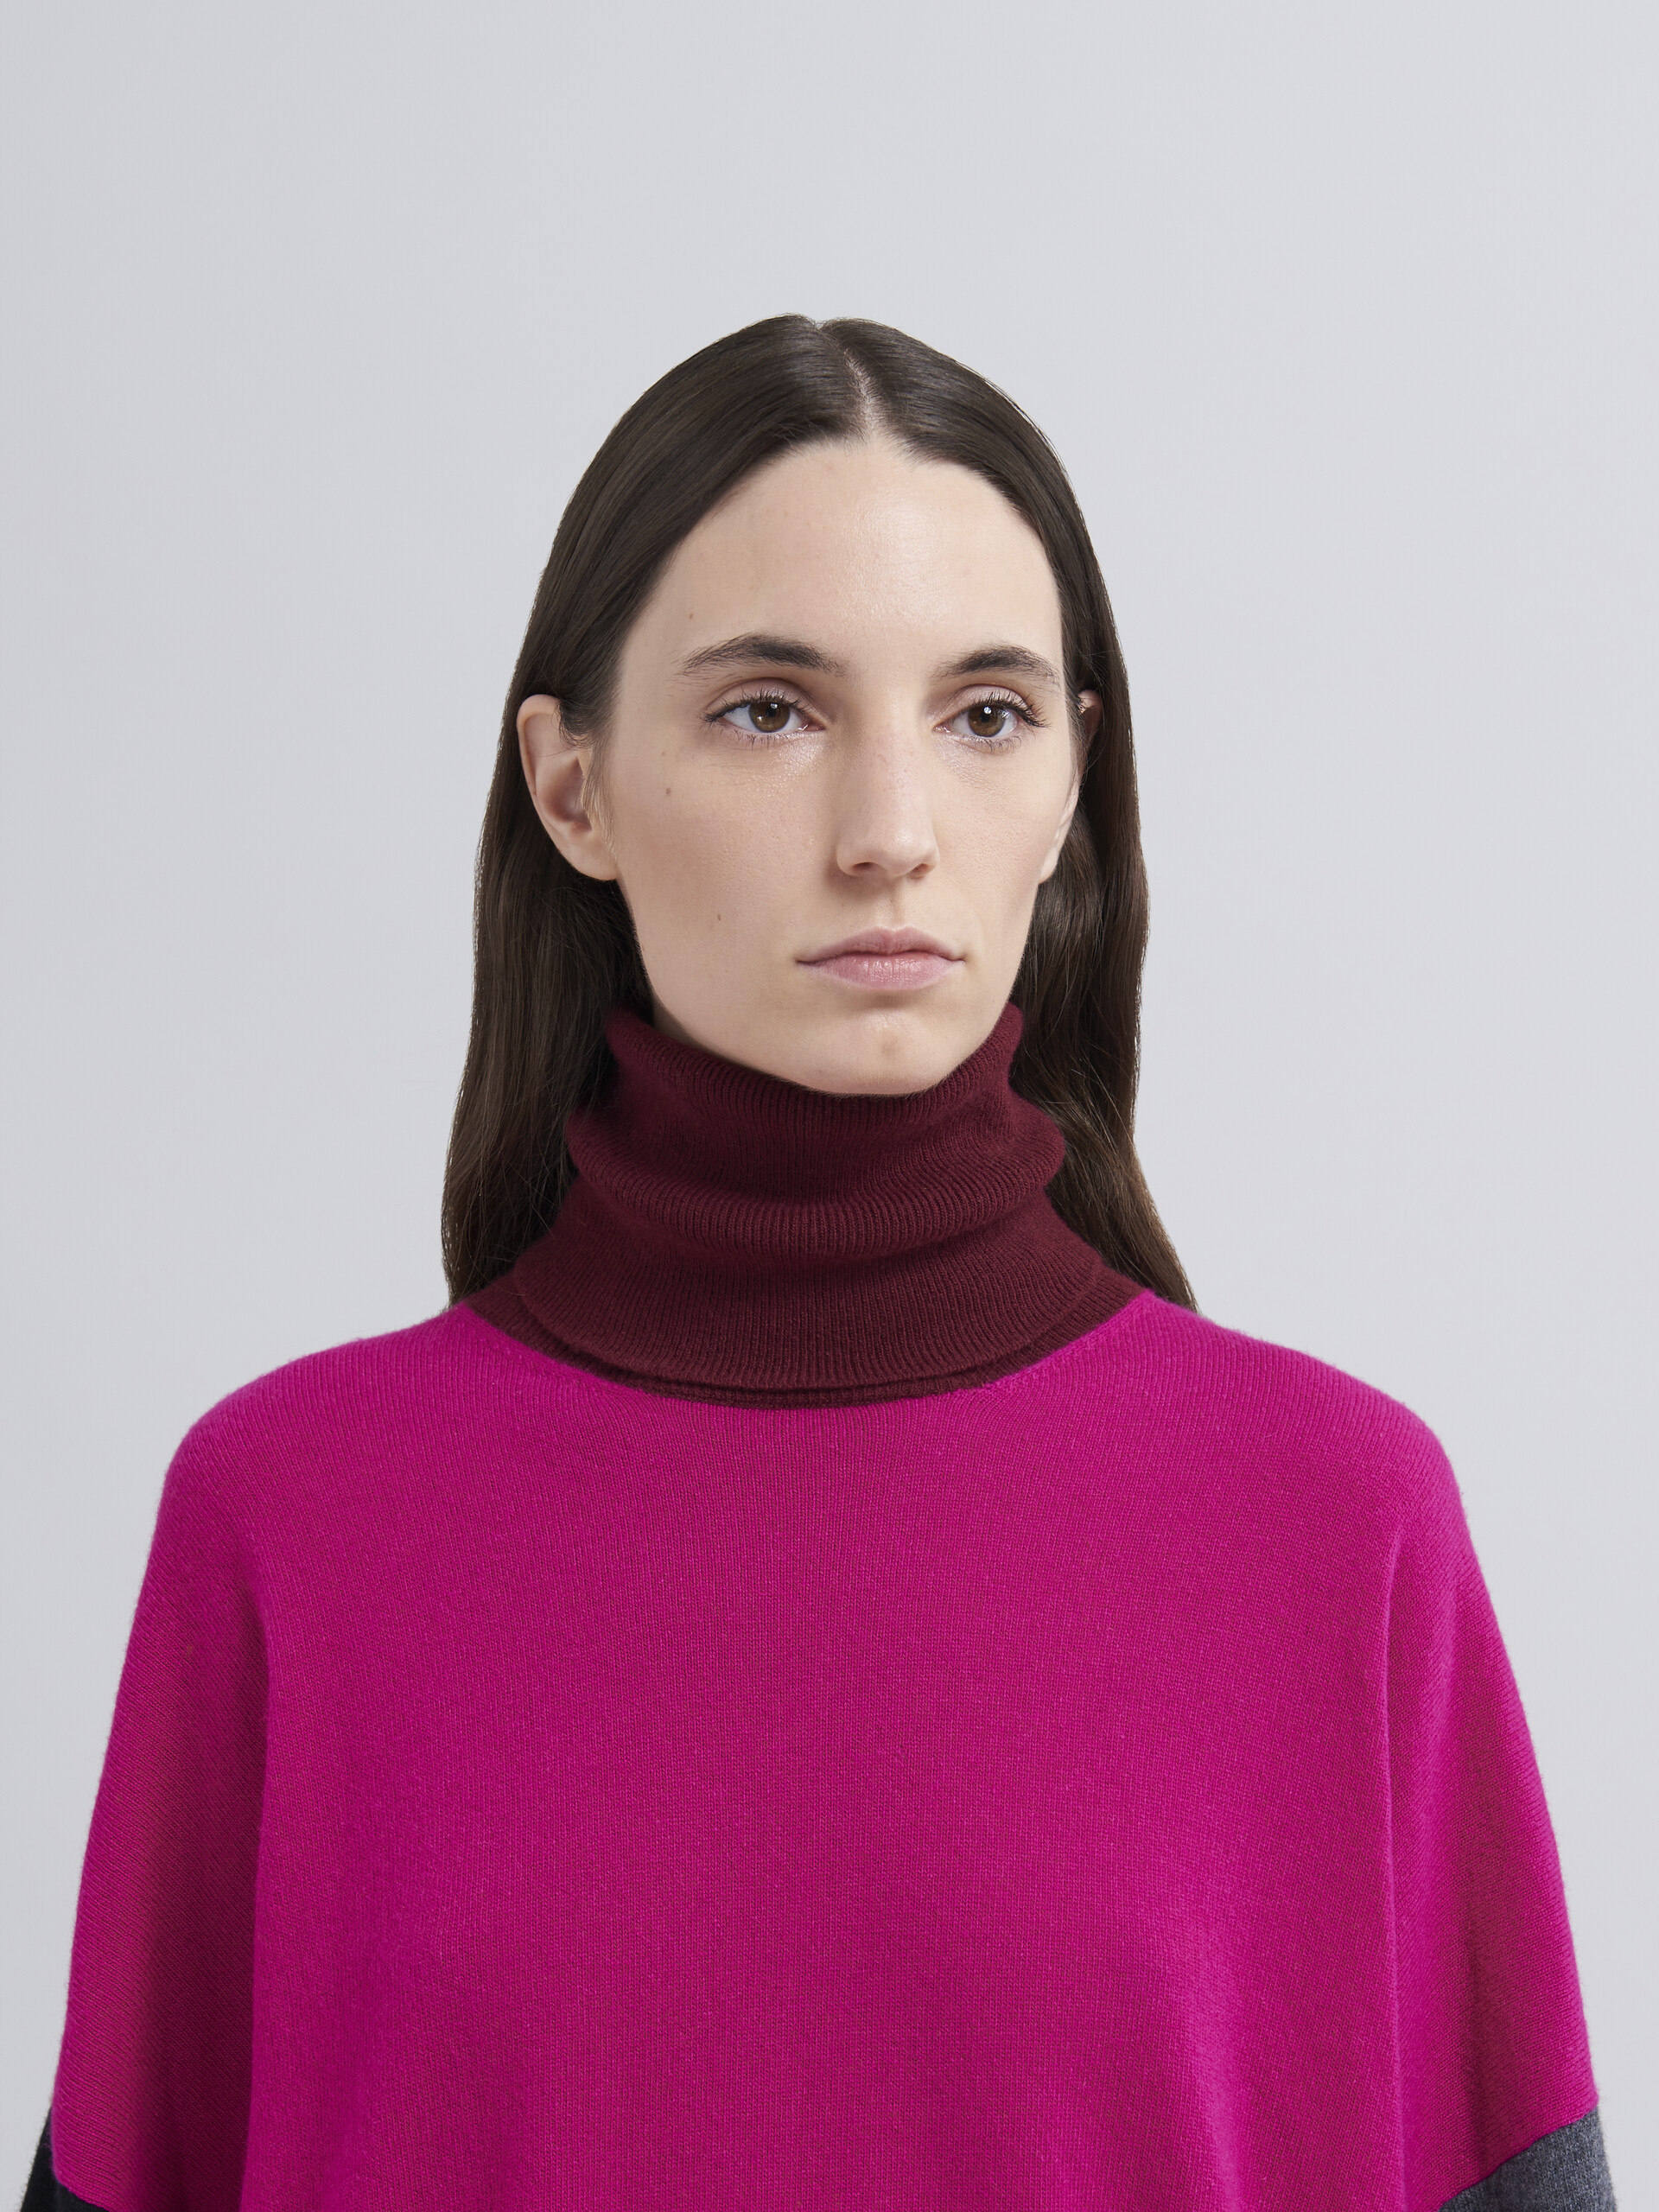 Colourblock wool and cashmere sweater - Pullovers - Image 4